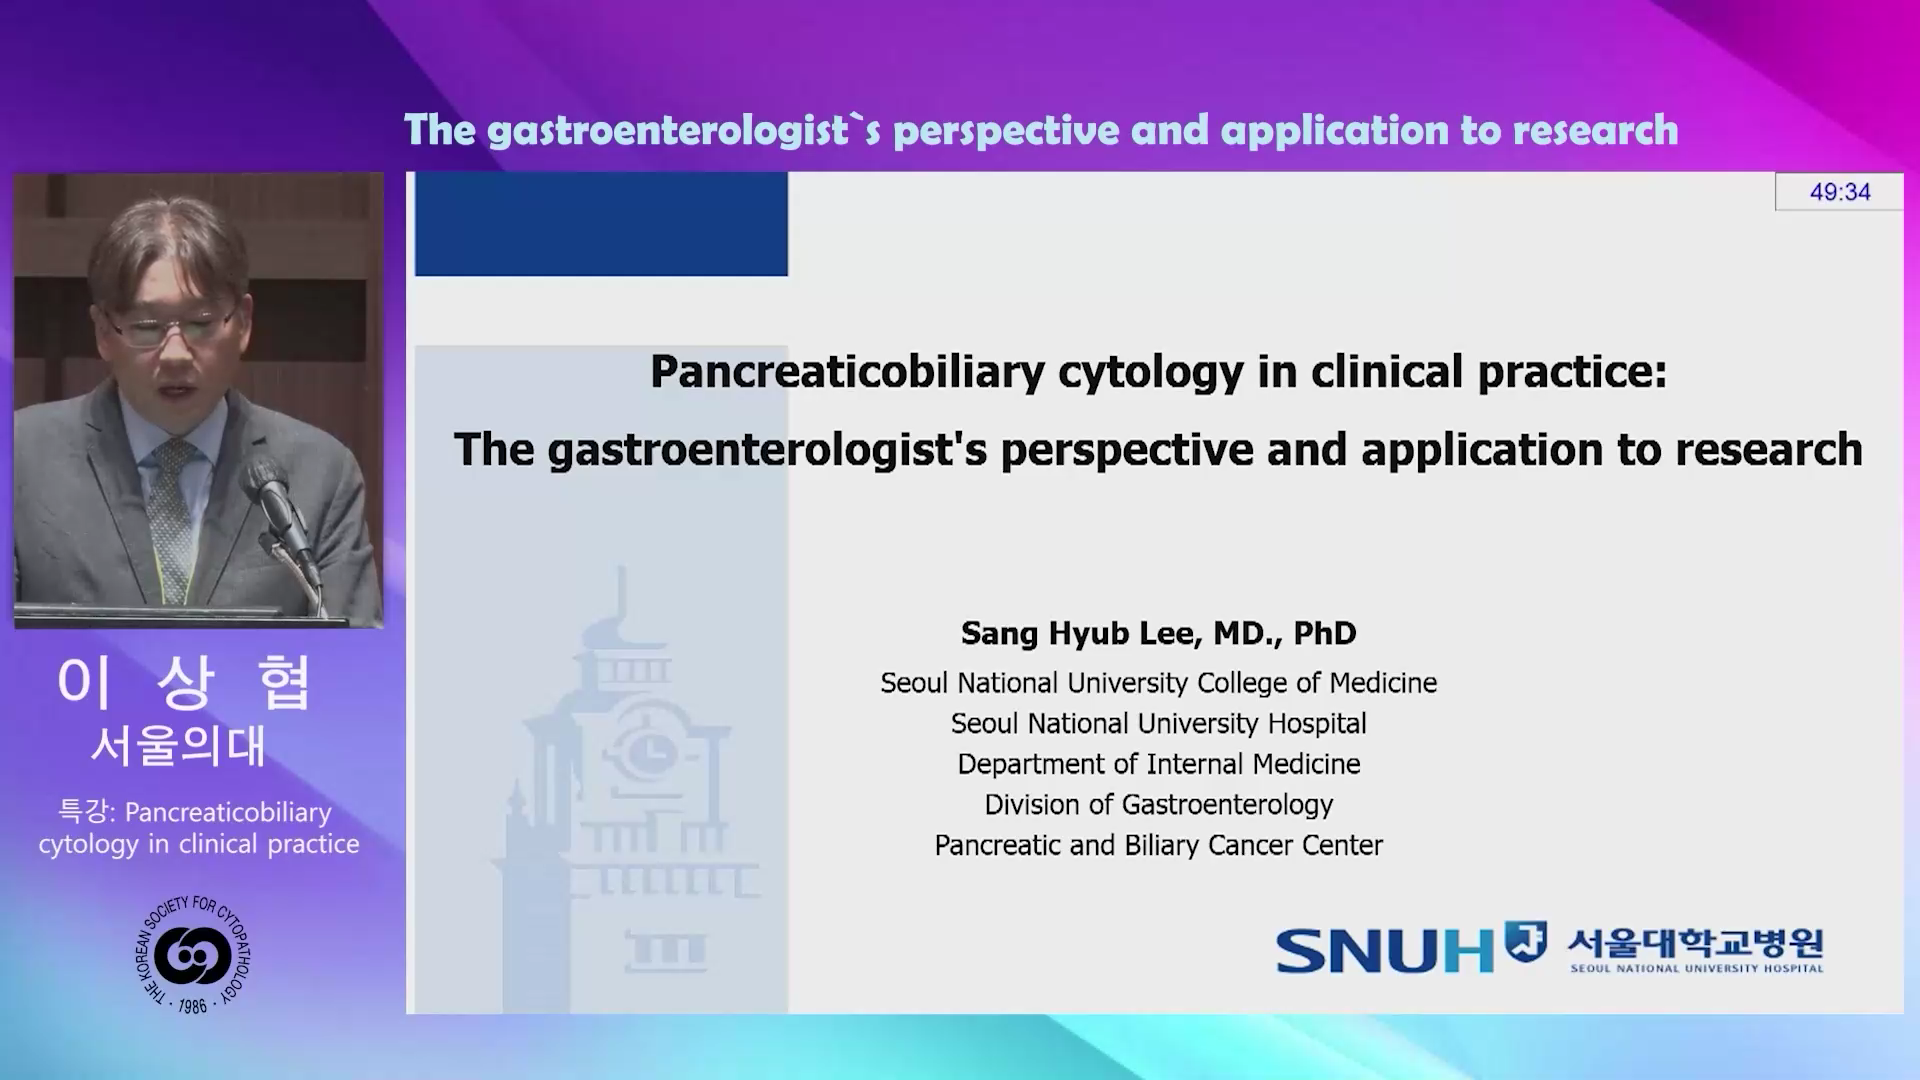 The gastroenterologist's perspective and application to research